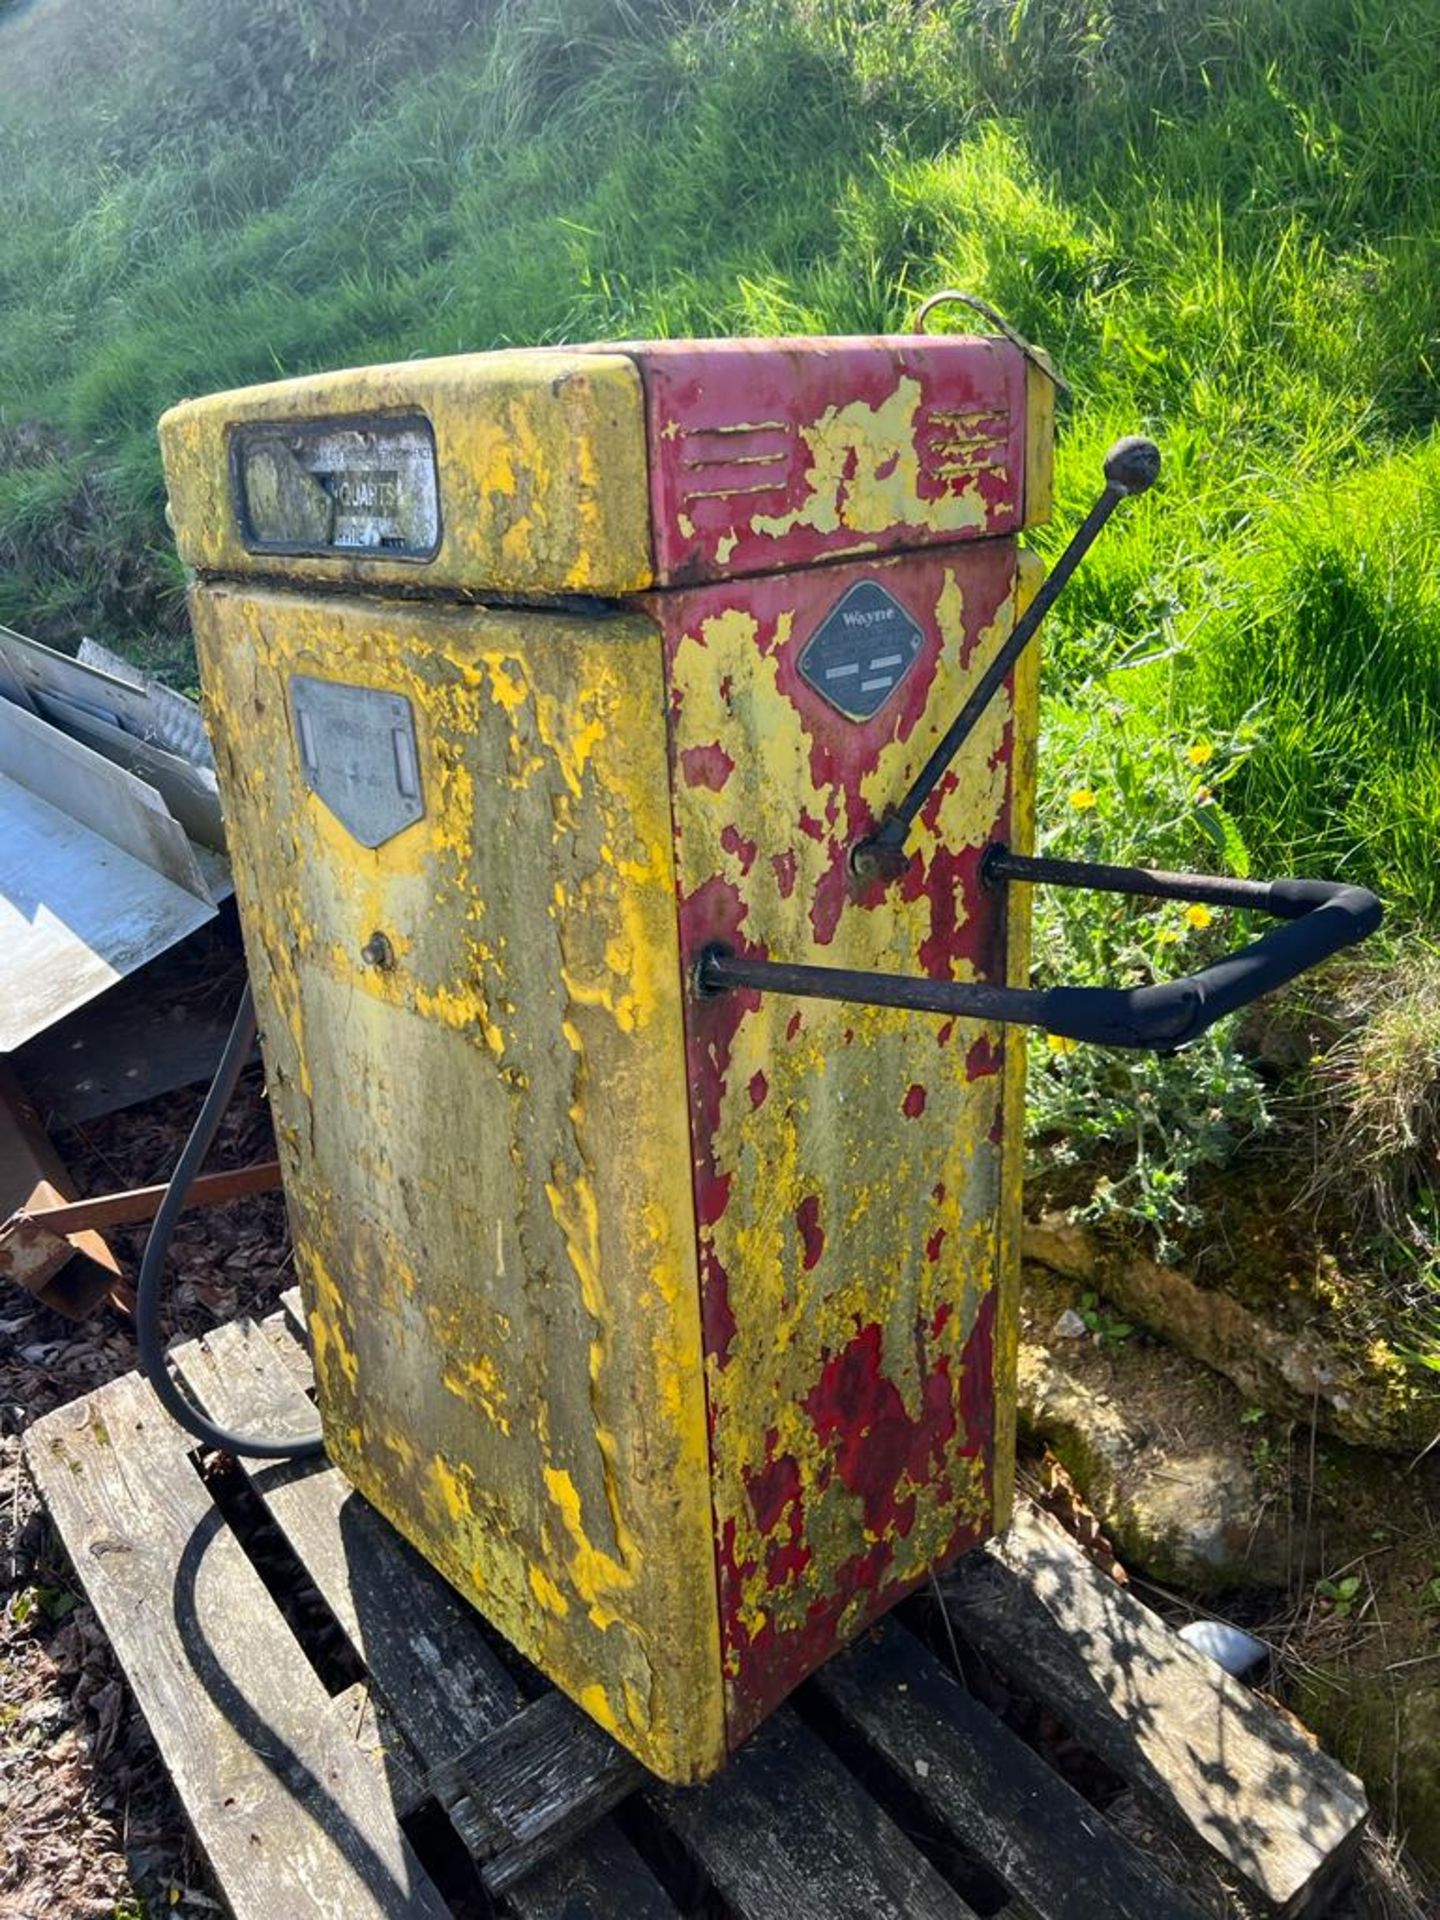 A vintage Shell 2T petrol pump in barn find condition.